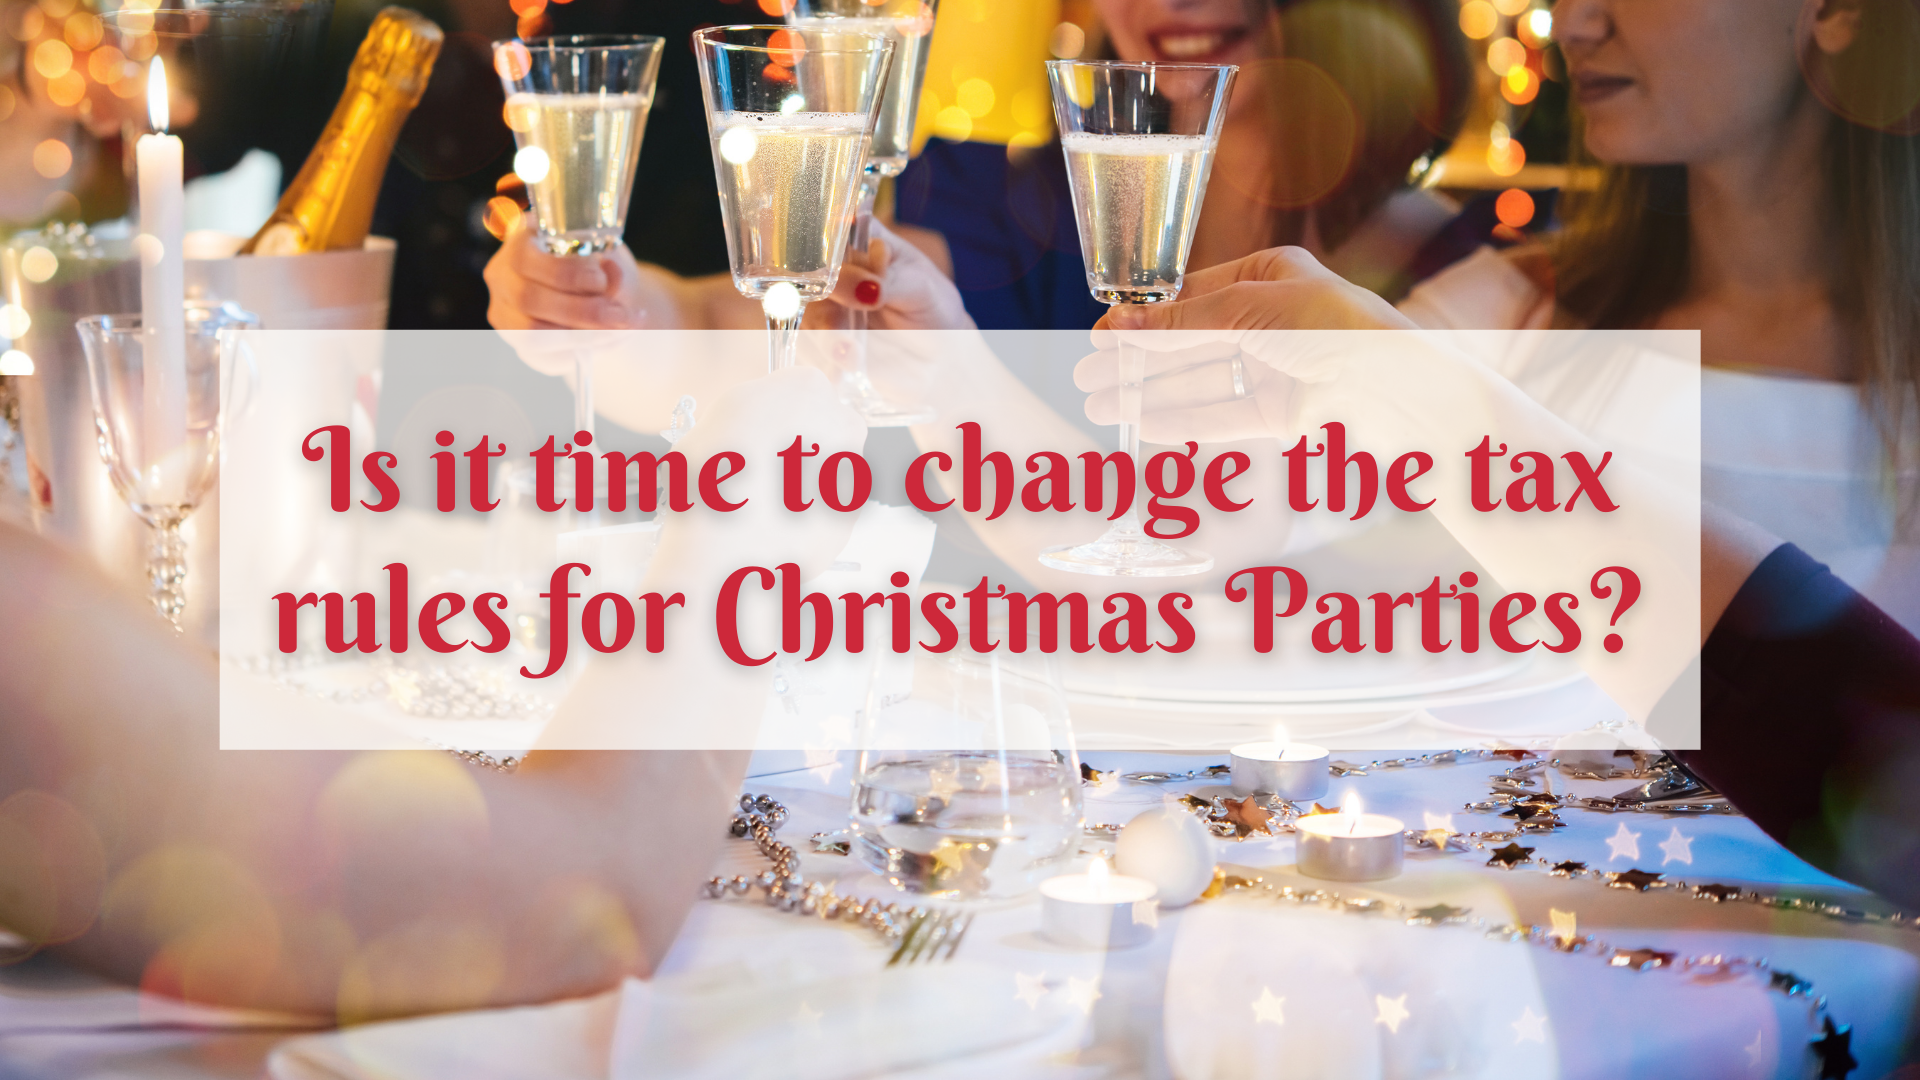 Is it time to change the tax rules for Christmas parties?